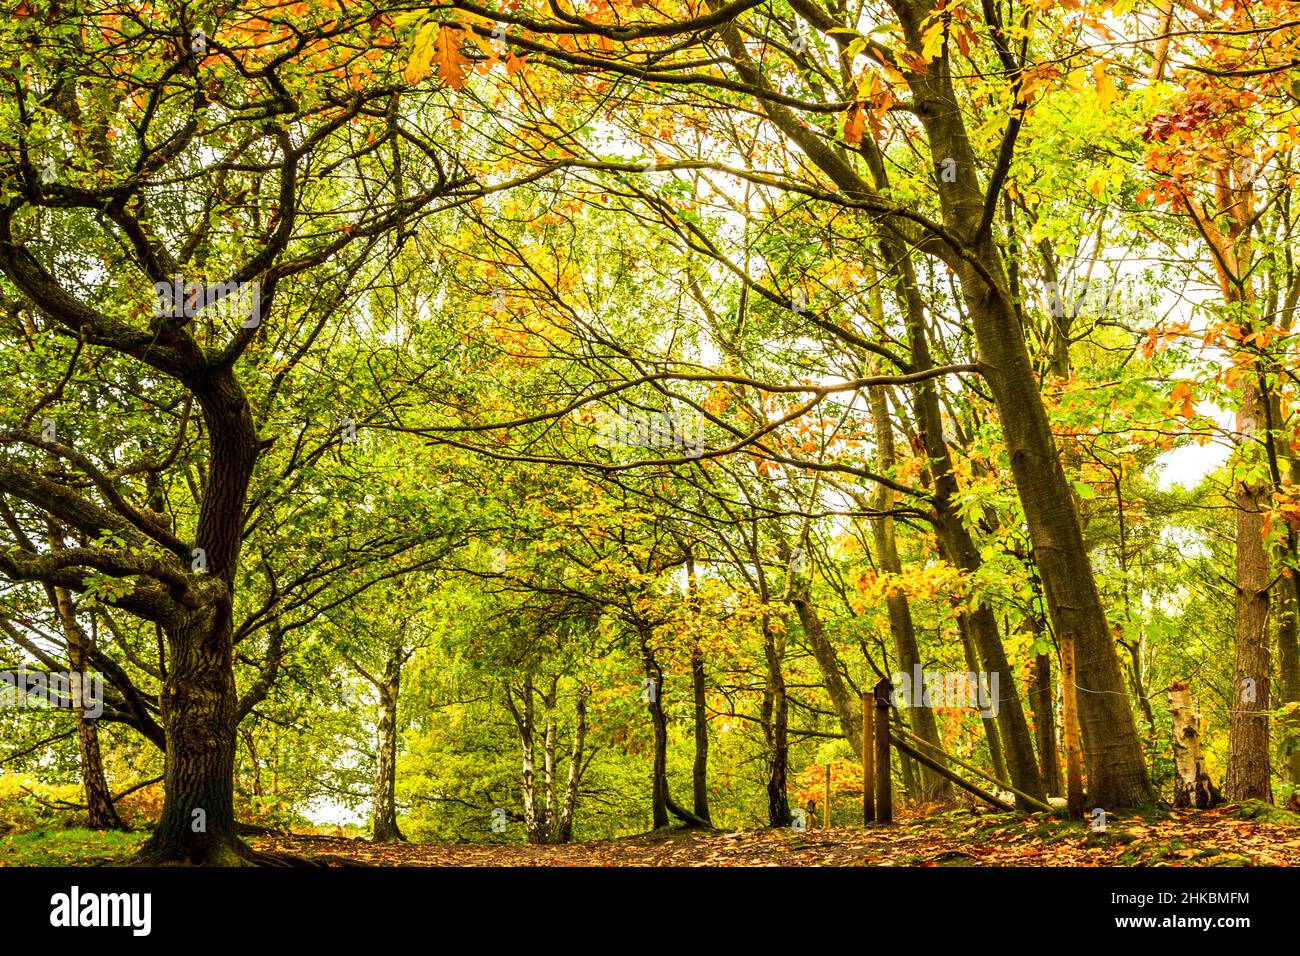 Autumn leaves in the United Kingdom Stock Photo